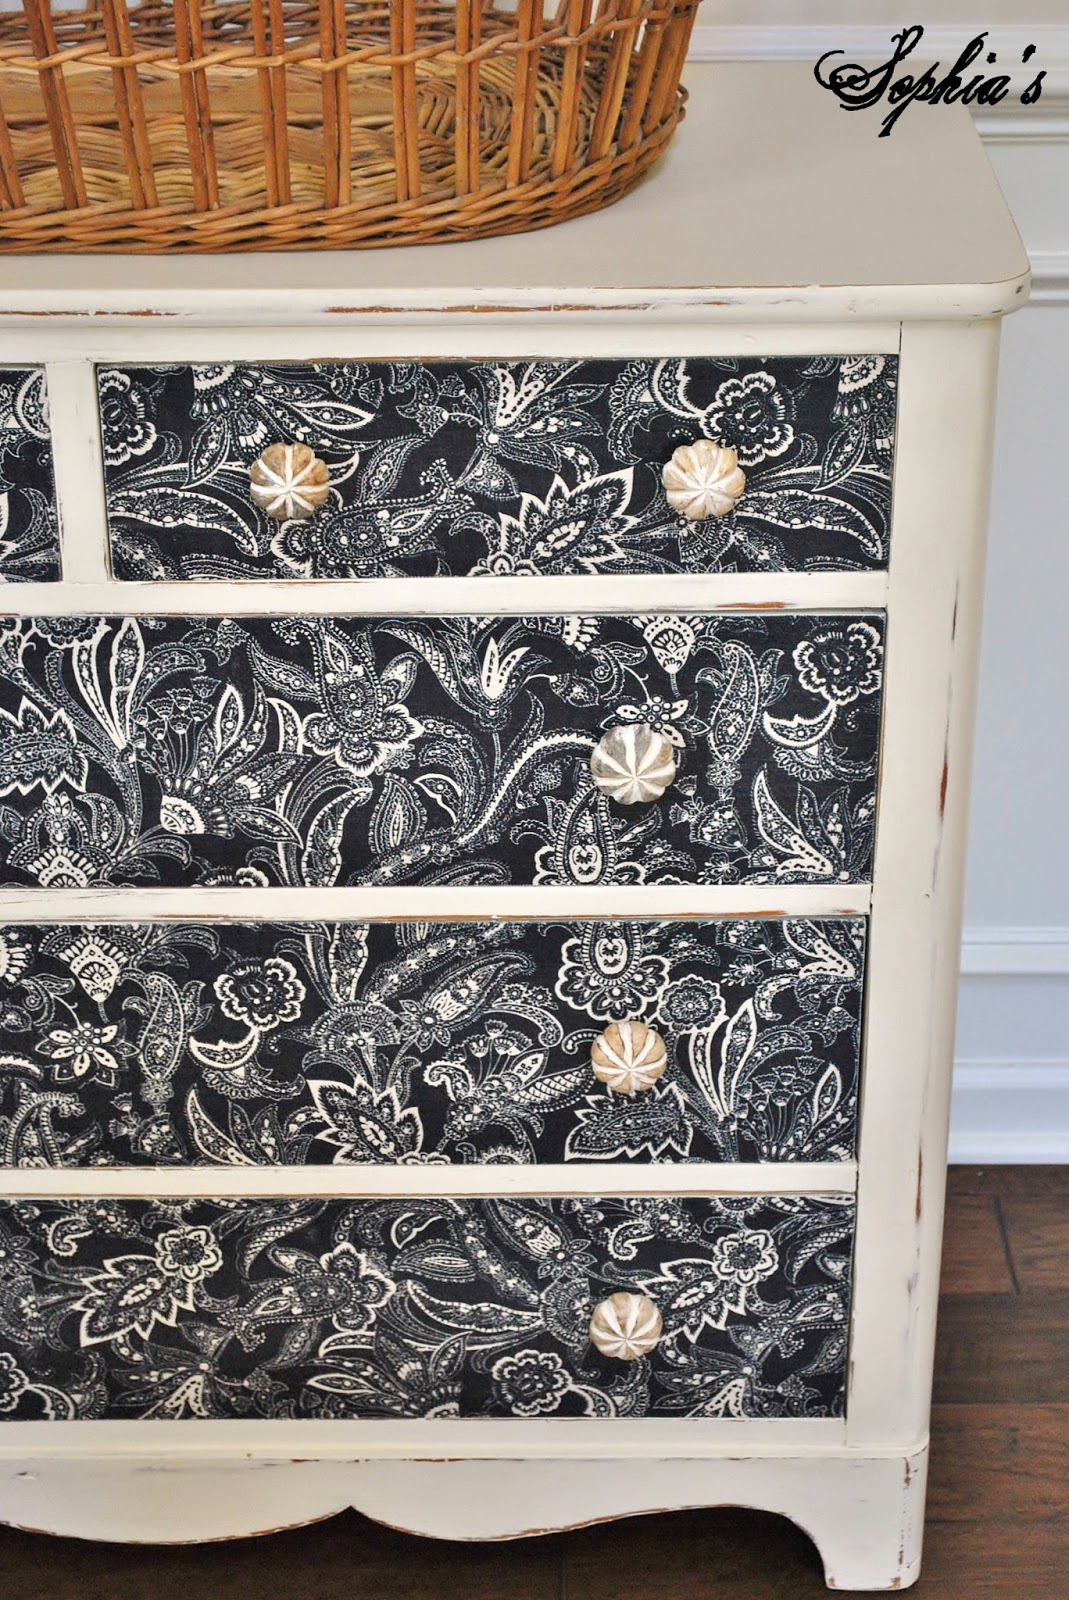 Sophia S Dresser Makeover With Fabric